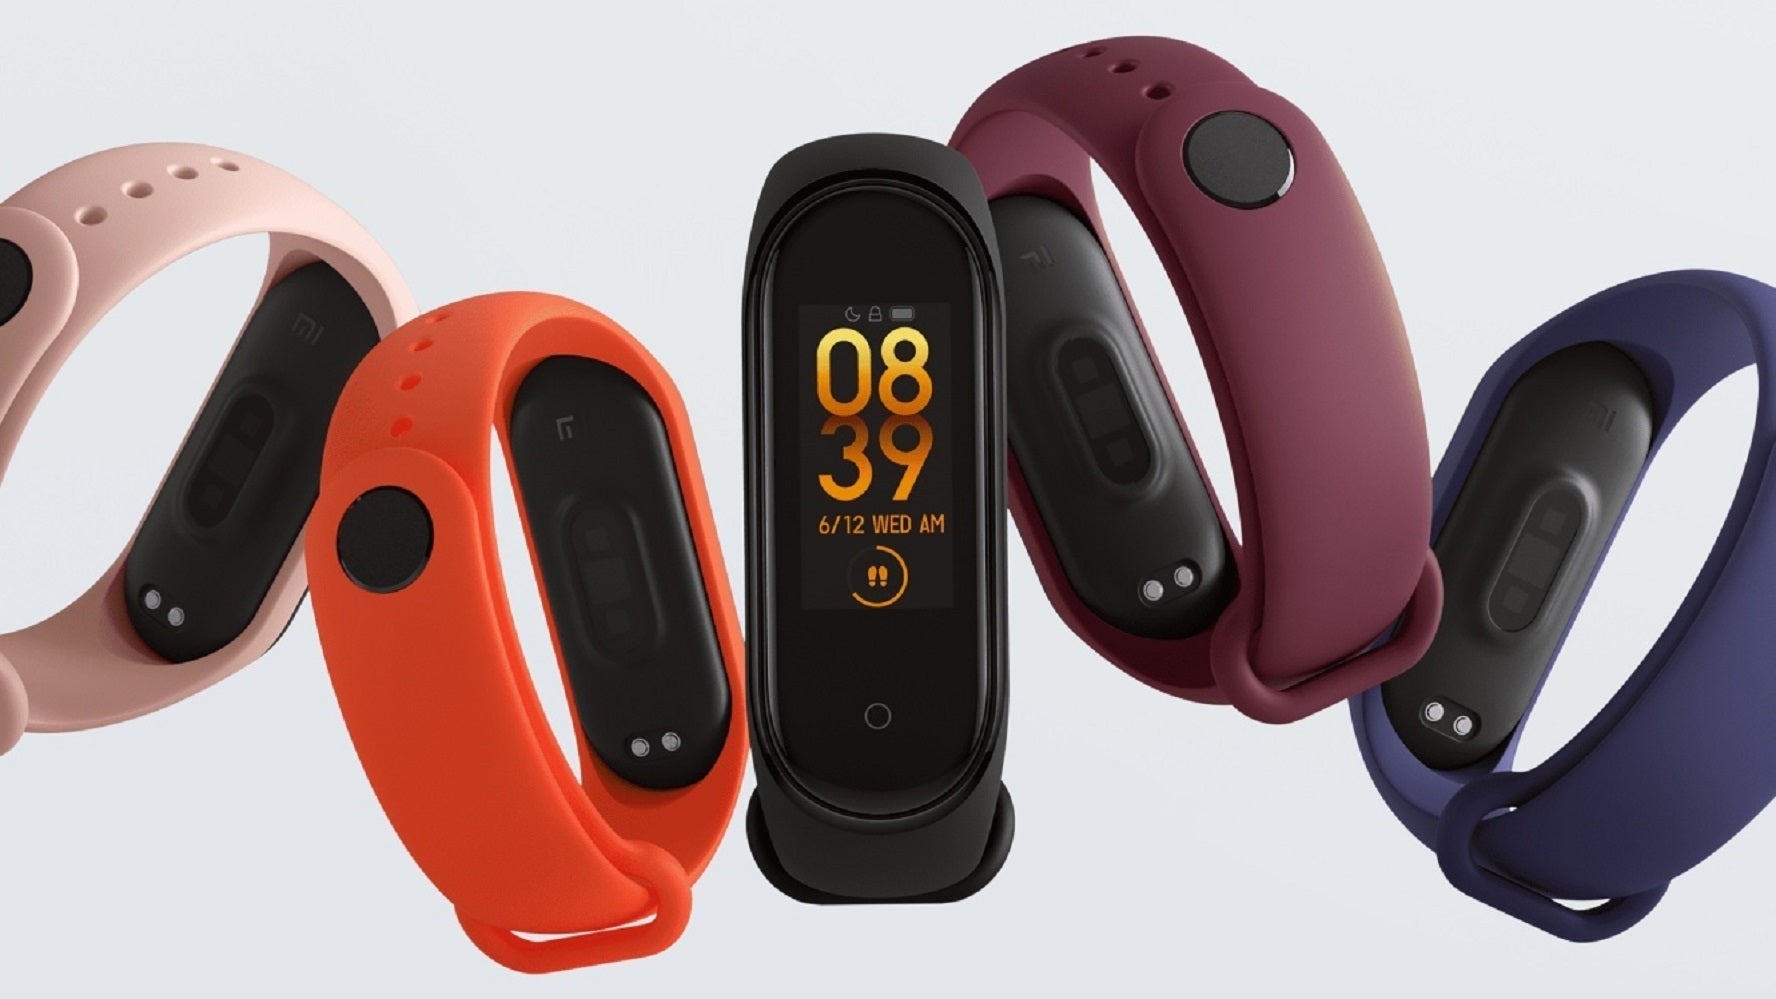 The Xiaomi Mi Band 4 - The Xiaomi Mi Band 5 release date has been revealed